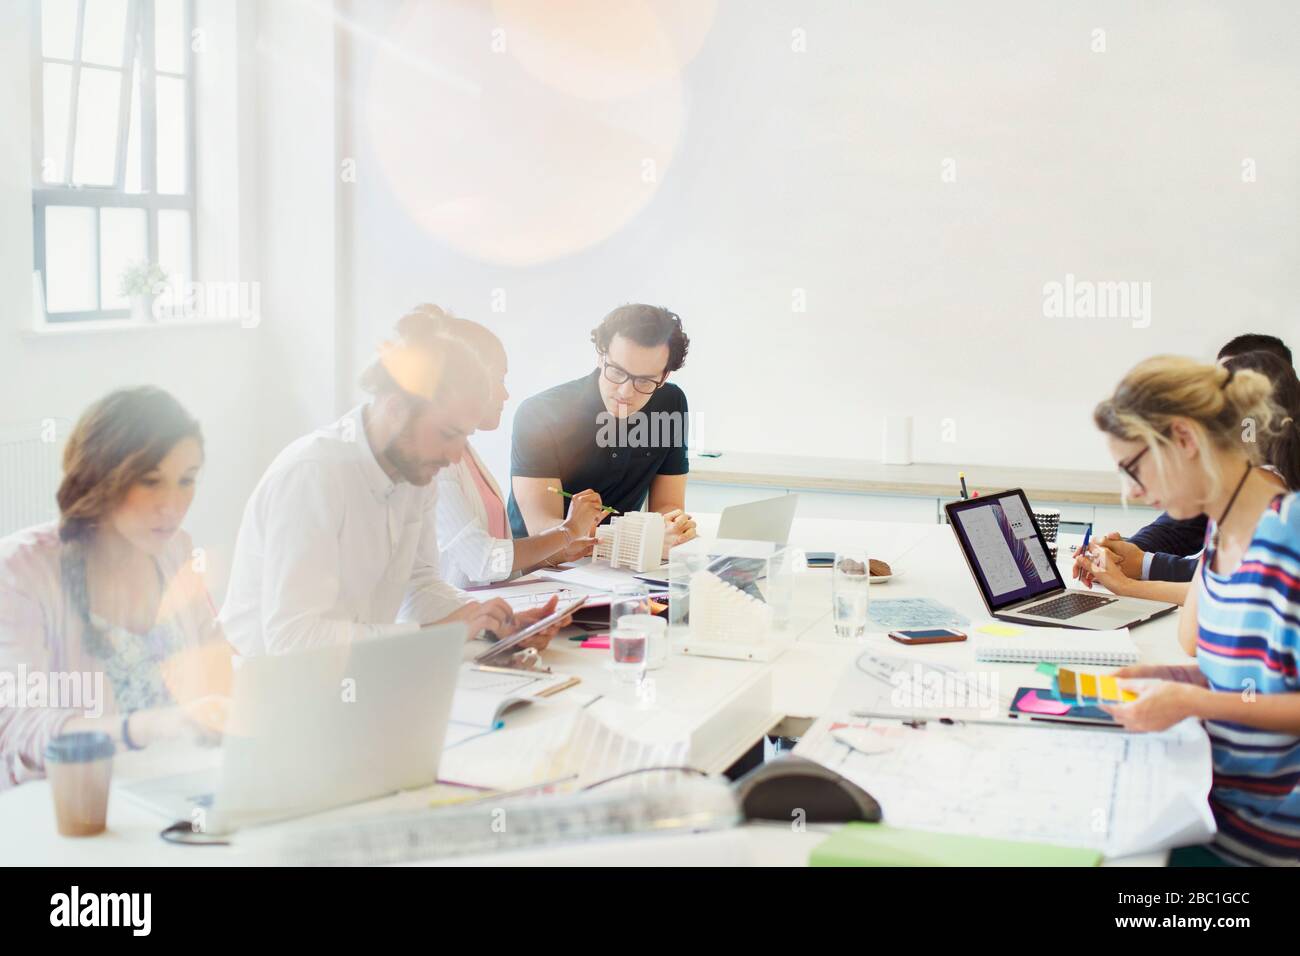 Designers working in conference room meeting Stock Photo